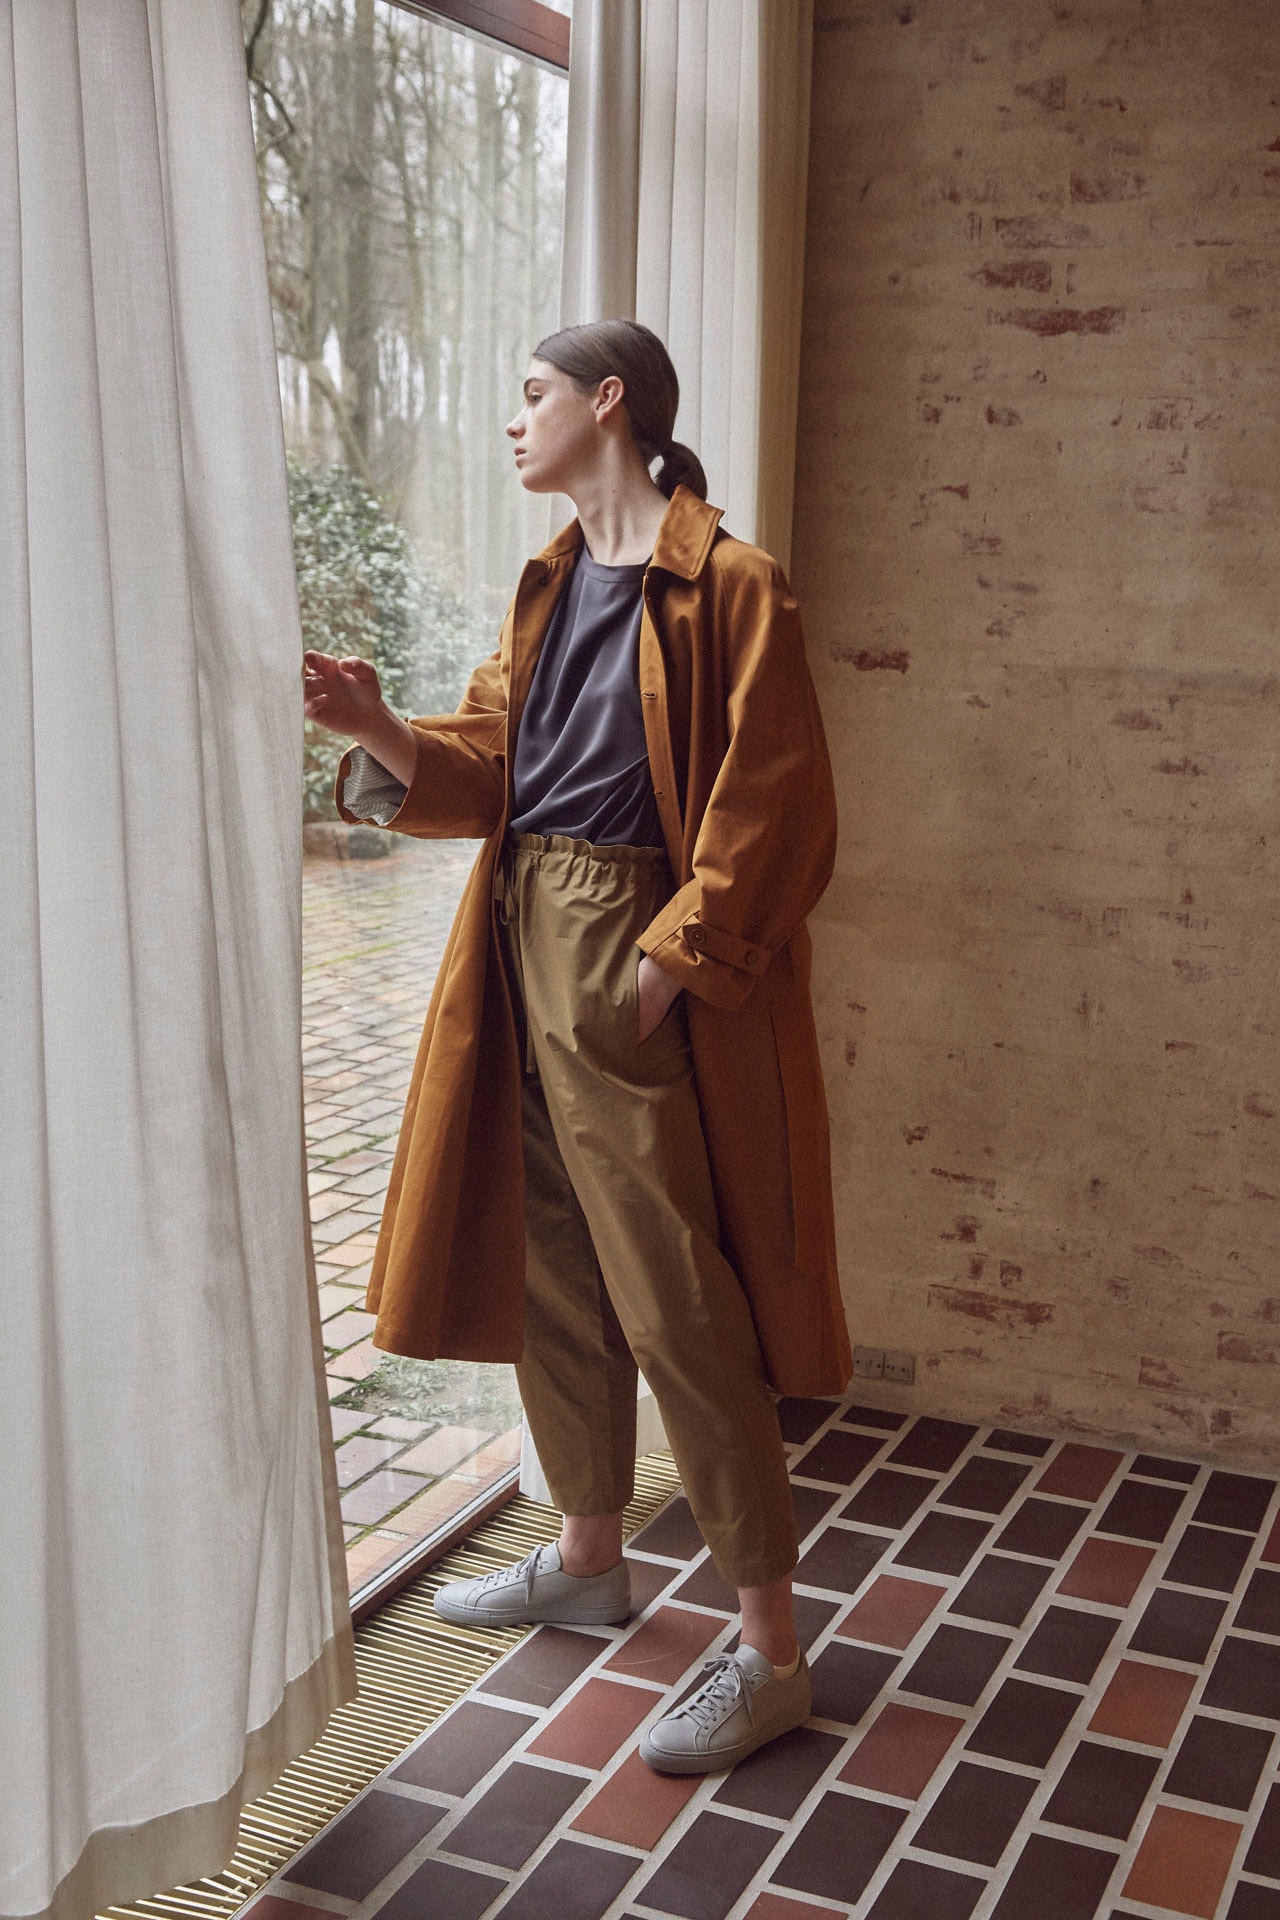 Norse Store Spring Summer 2019 Editorial Jacket Pants Brown Top Grey